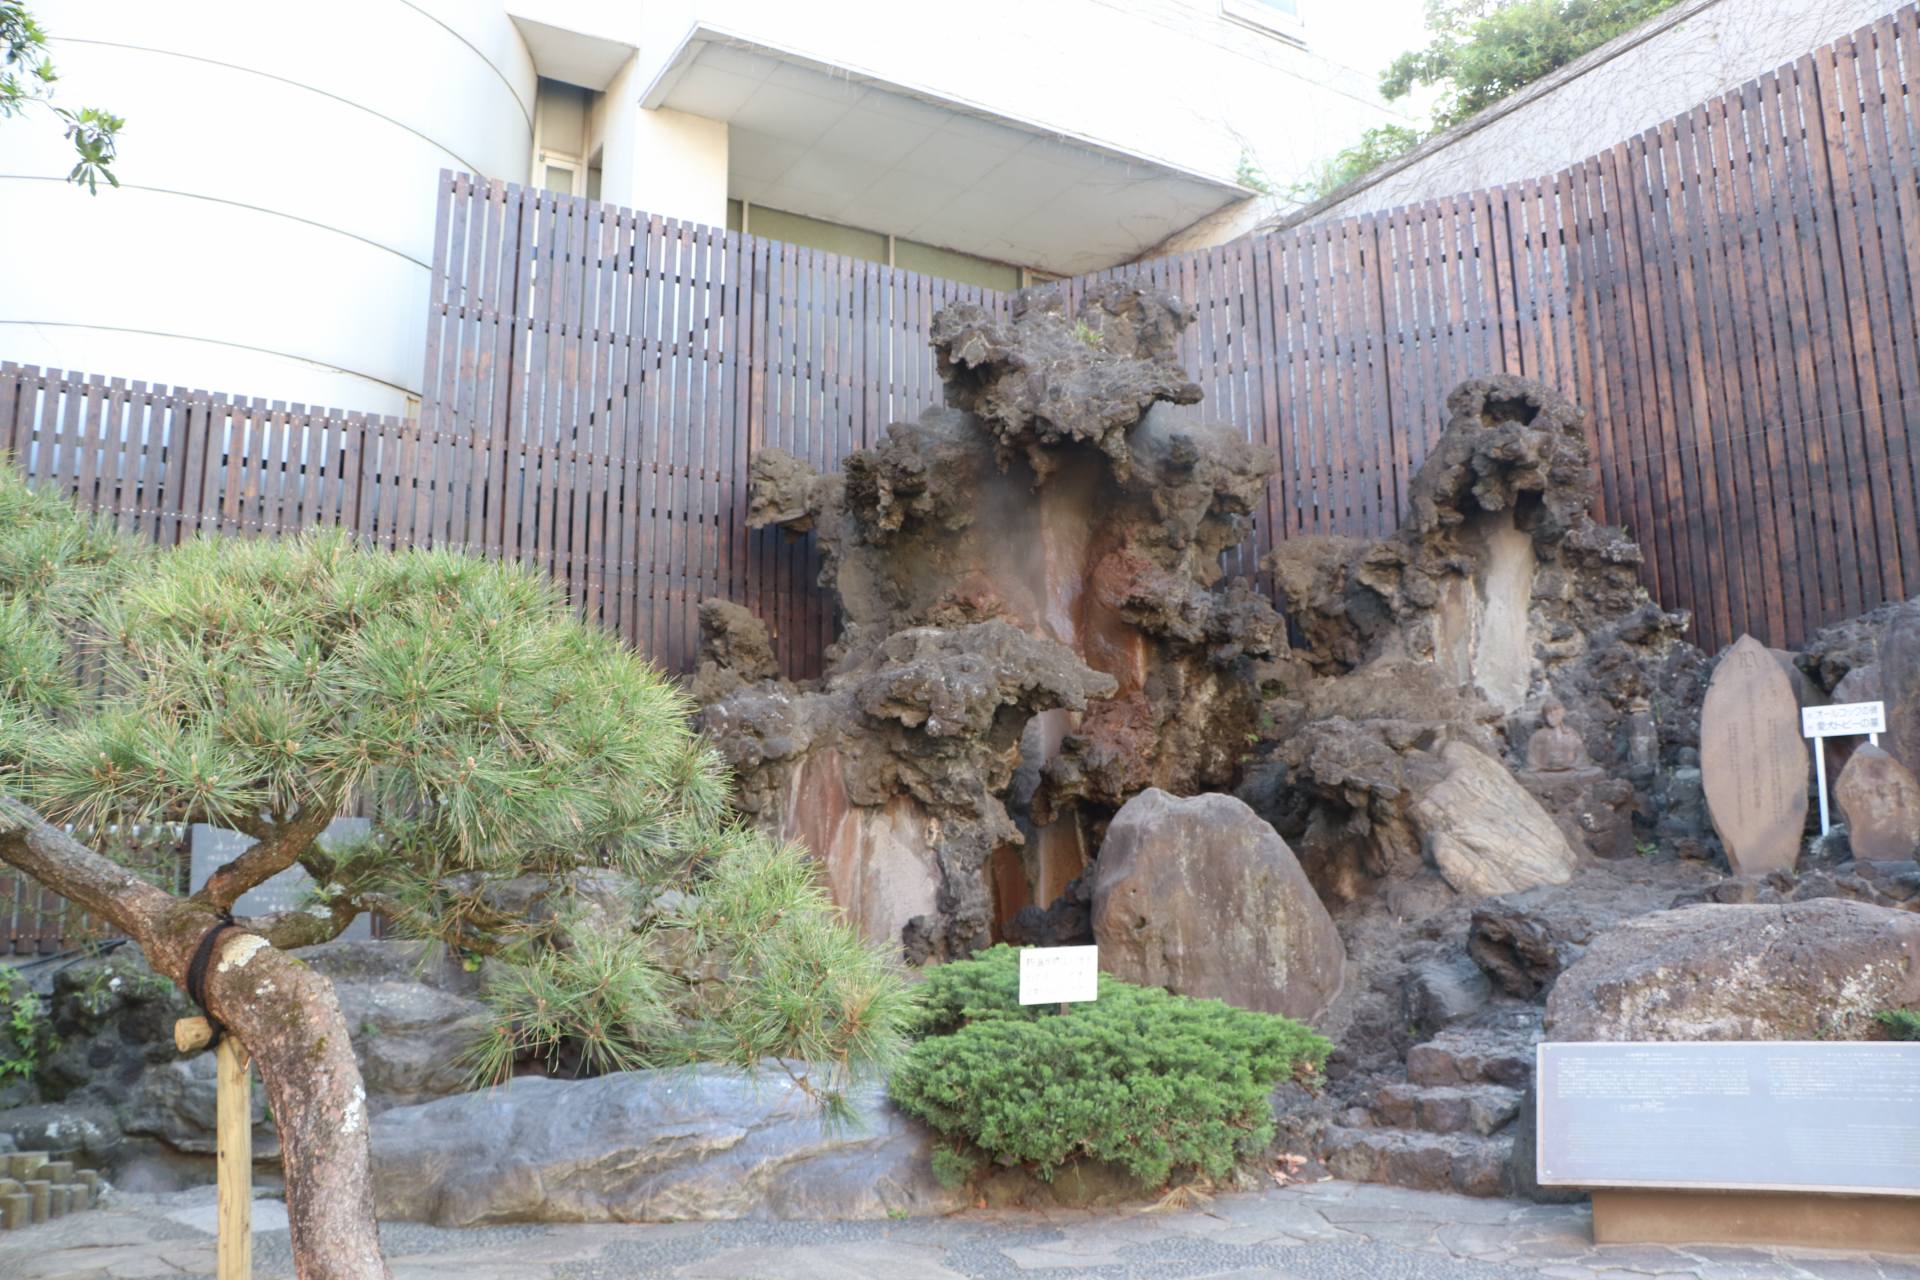 Atami Onsen is renowned as the site of Japan's first hot spring health resort and stands as one of the country's most popular hot spring destinations.